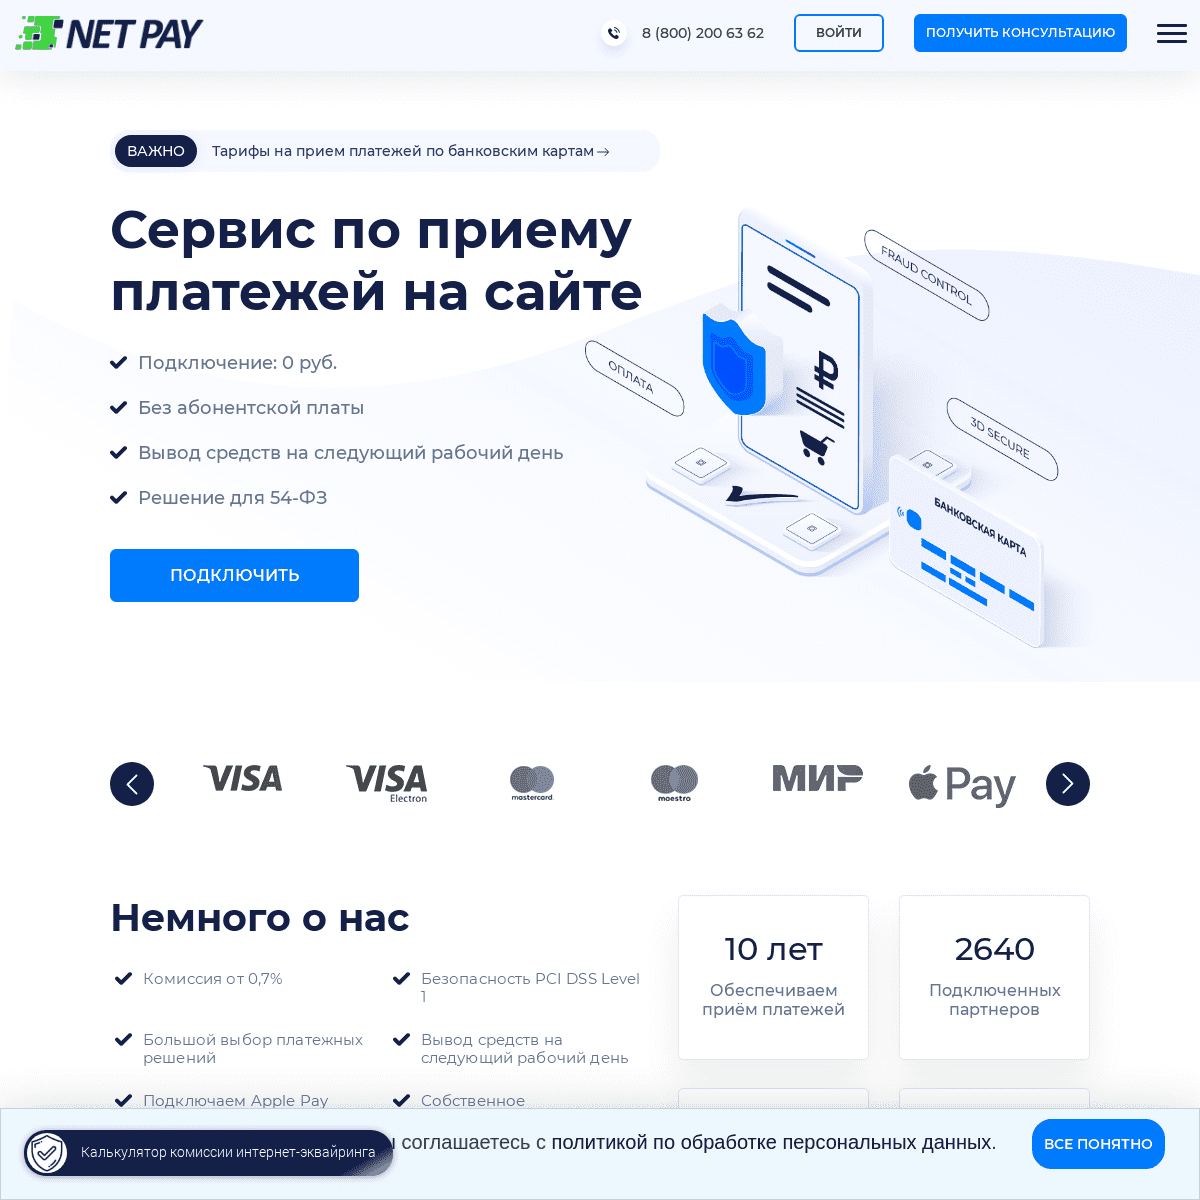 A complete backup of https://net2pay.ru